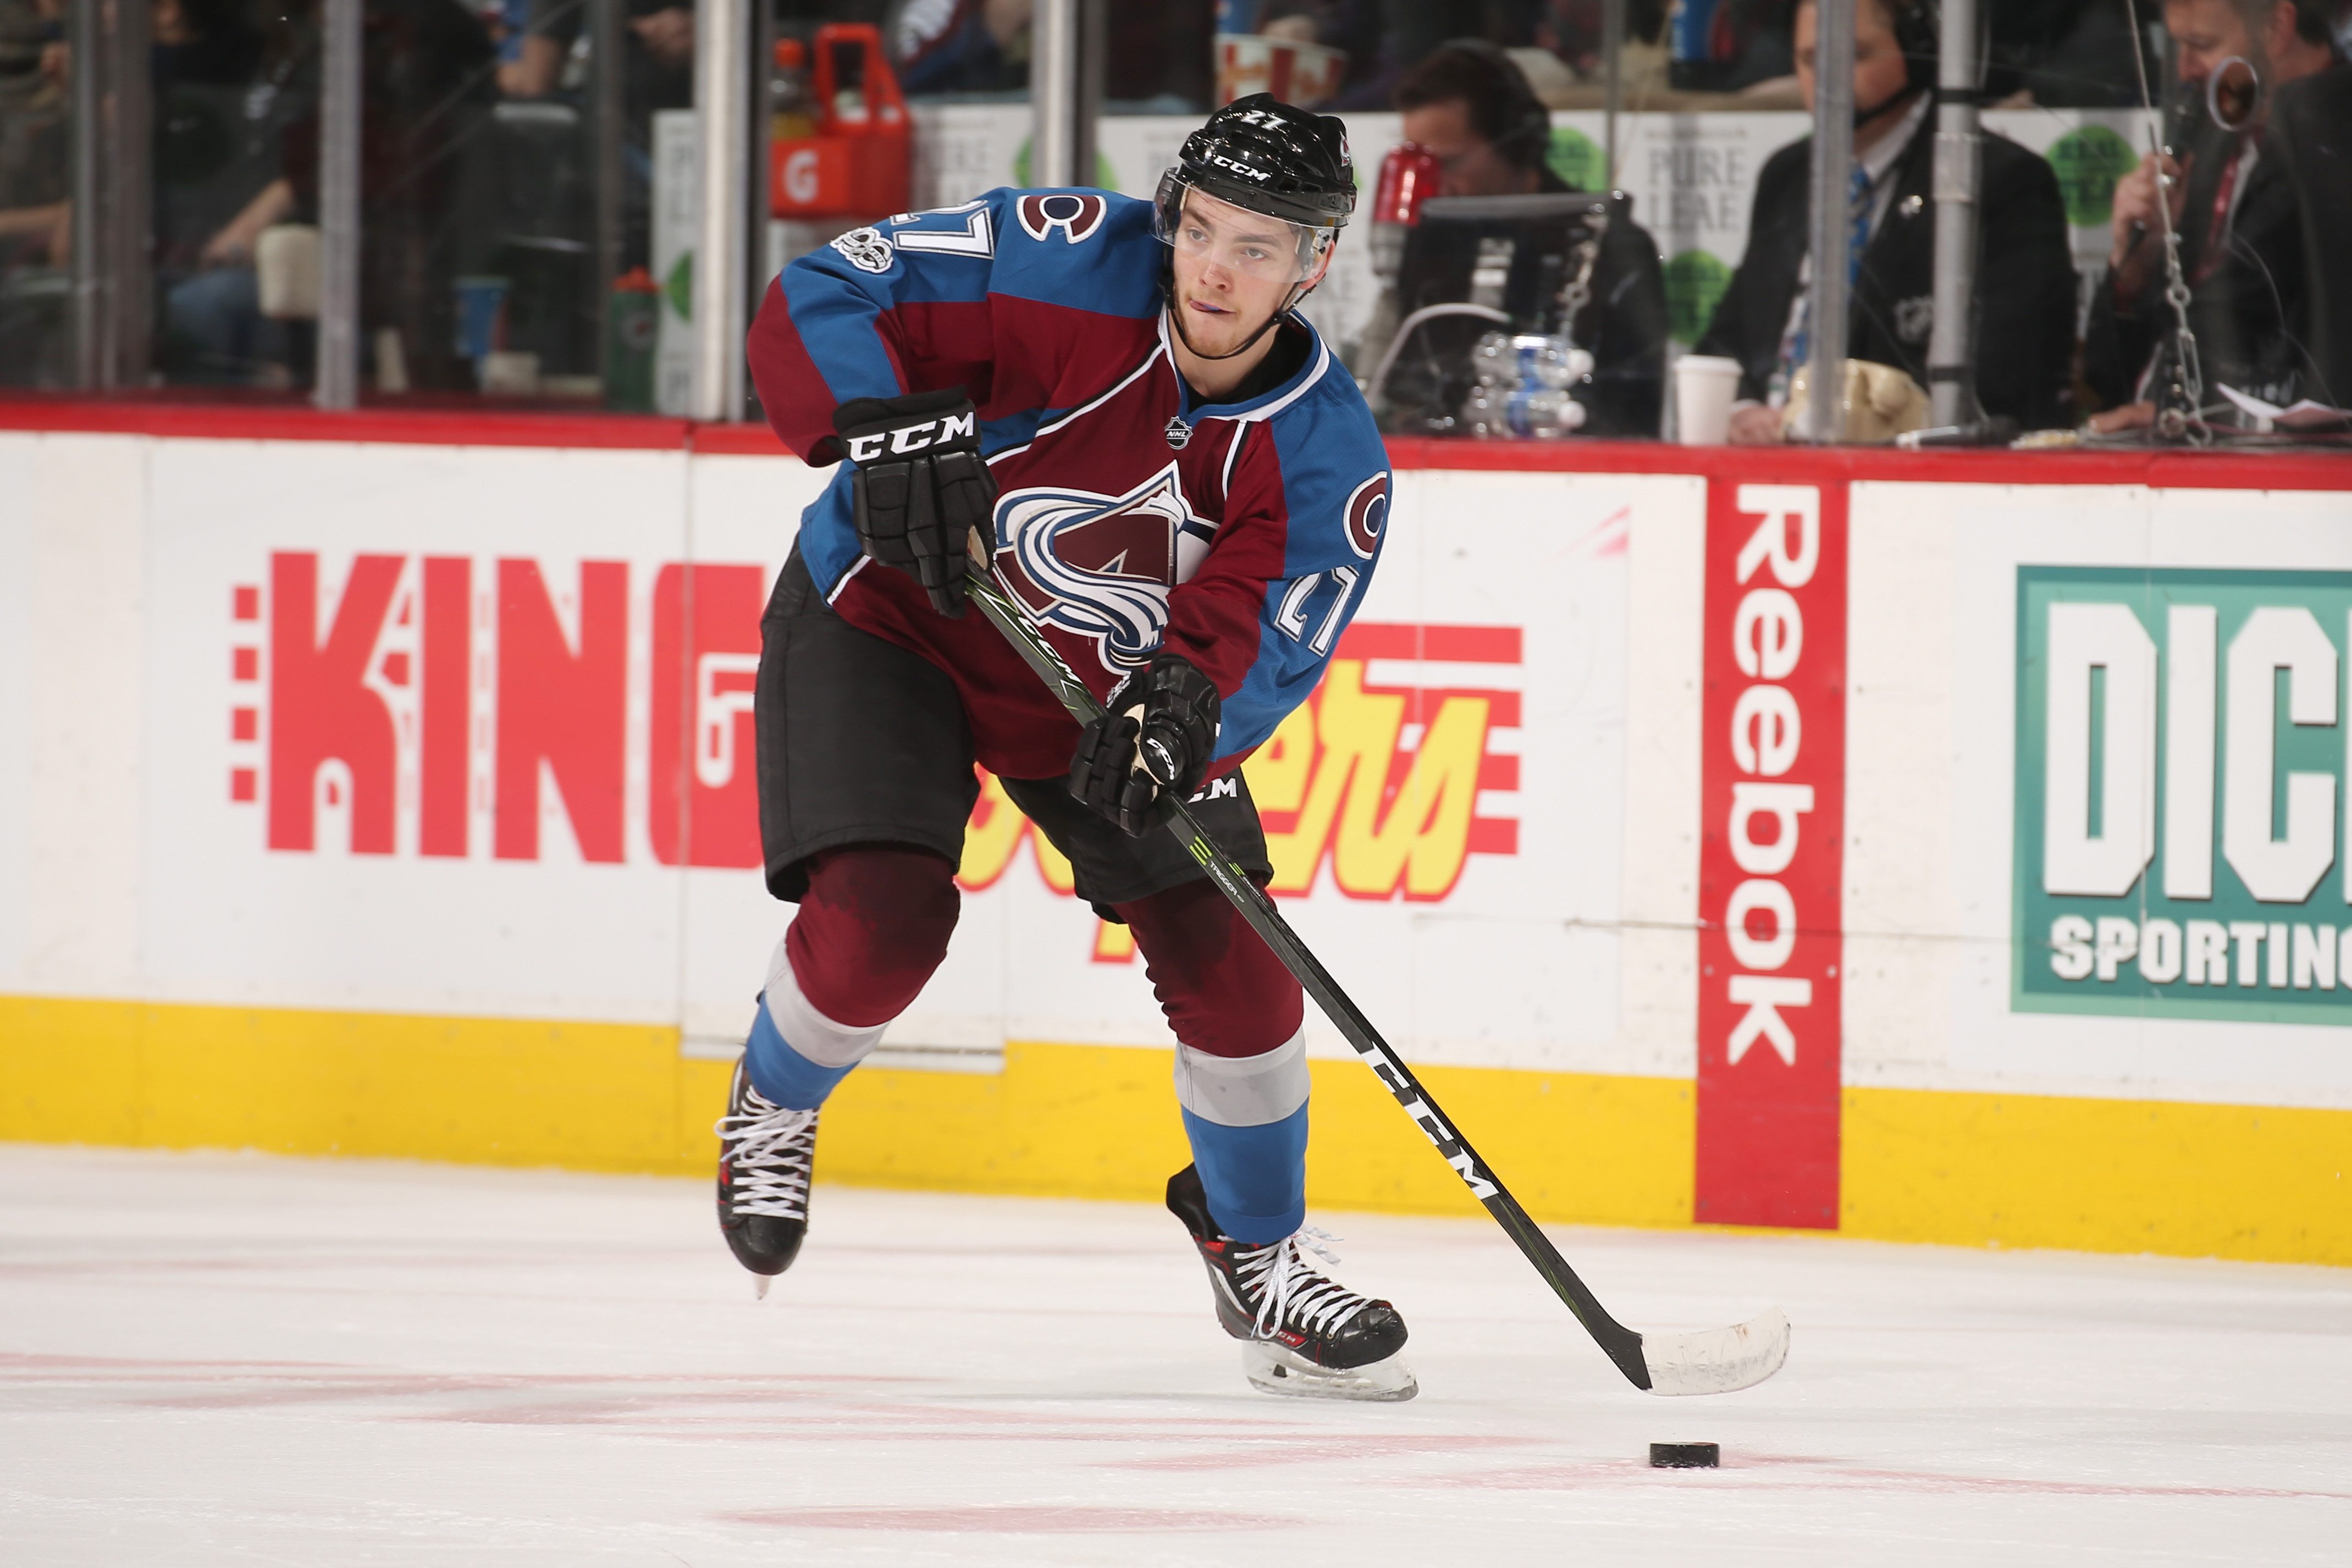 Colorado Avalanche: Why Tyson Jost is So Polarizing for Fans